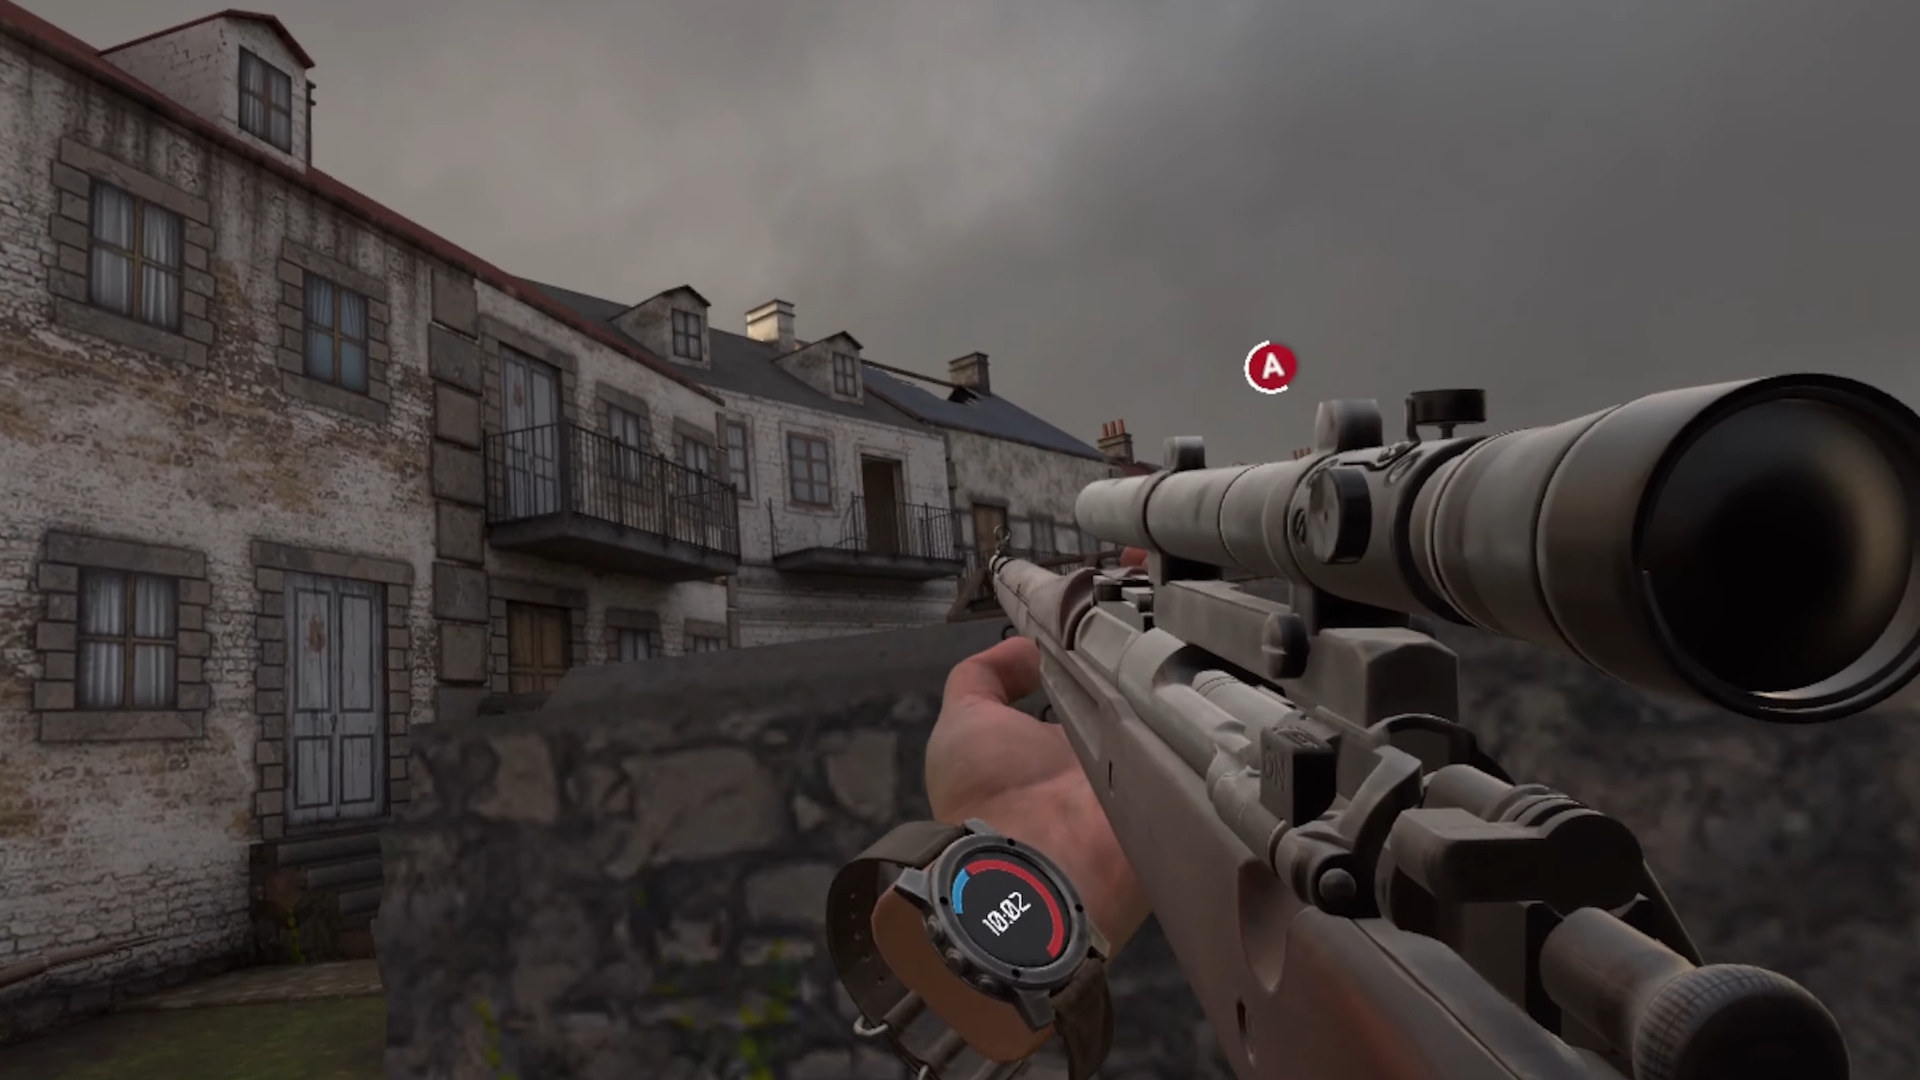 First-person view of a sniper rifle aiming at enemies in a building.